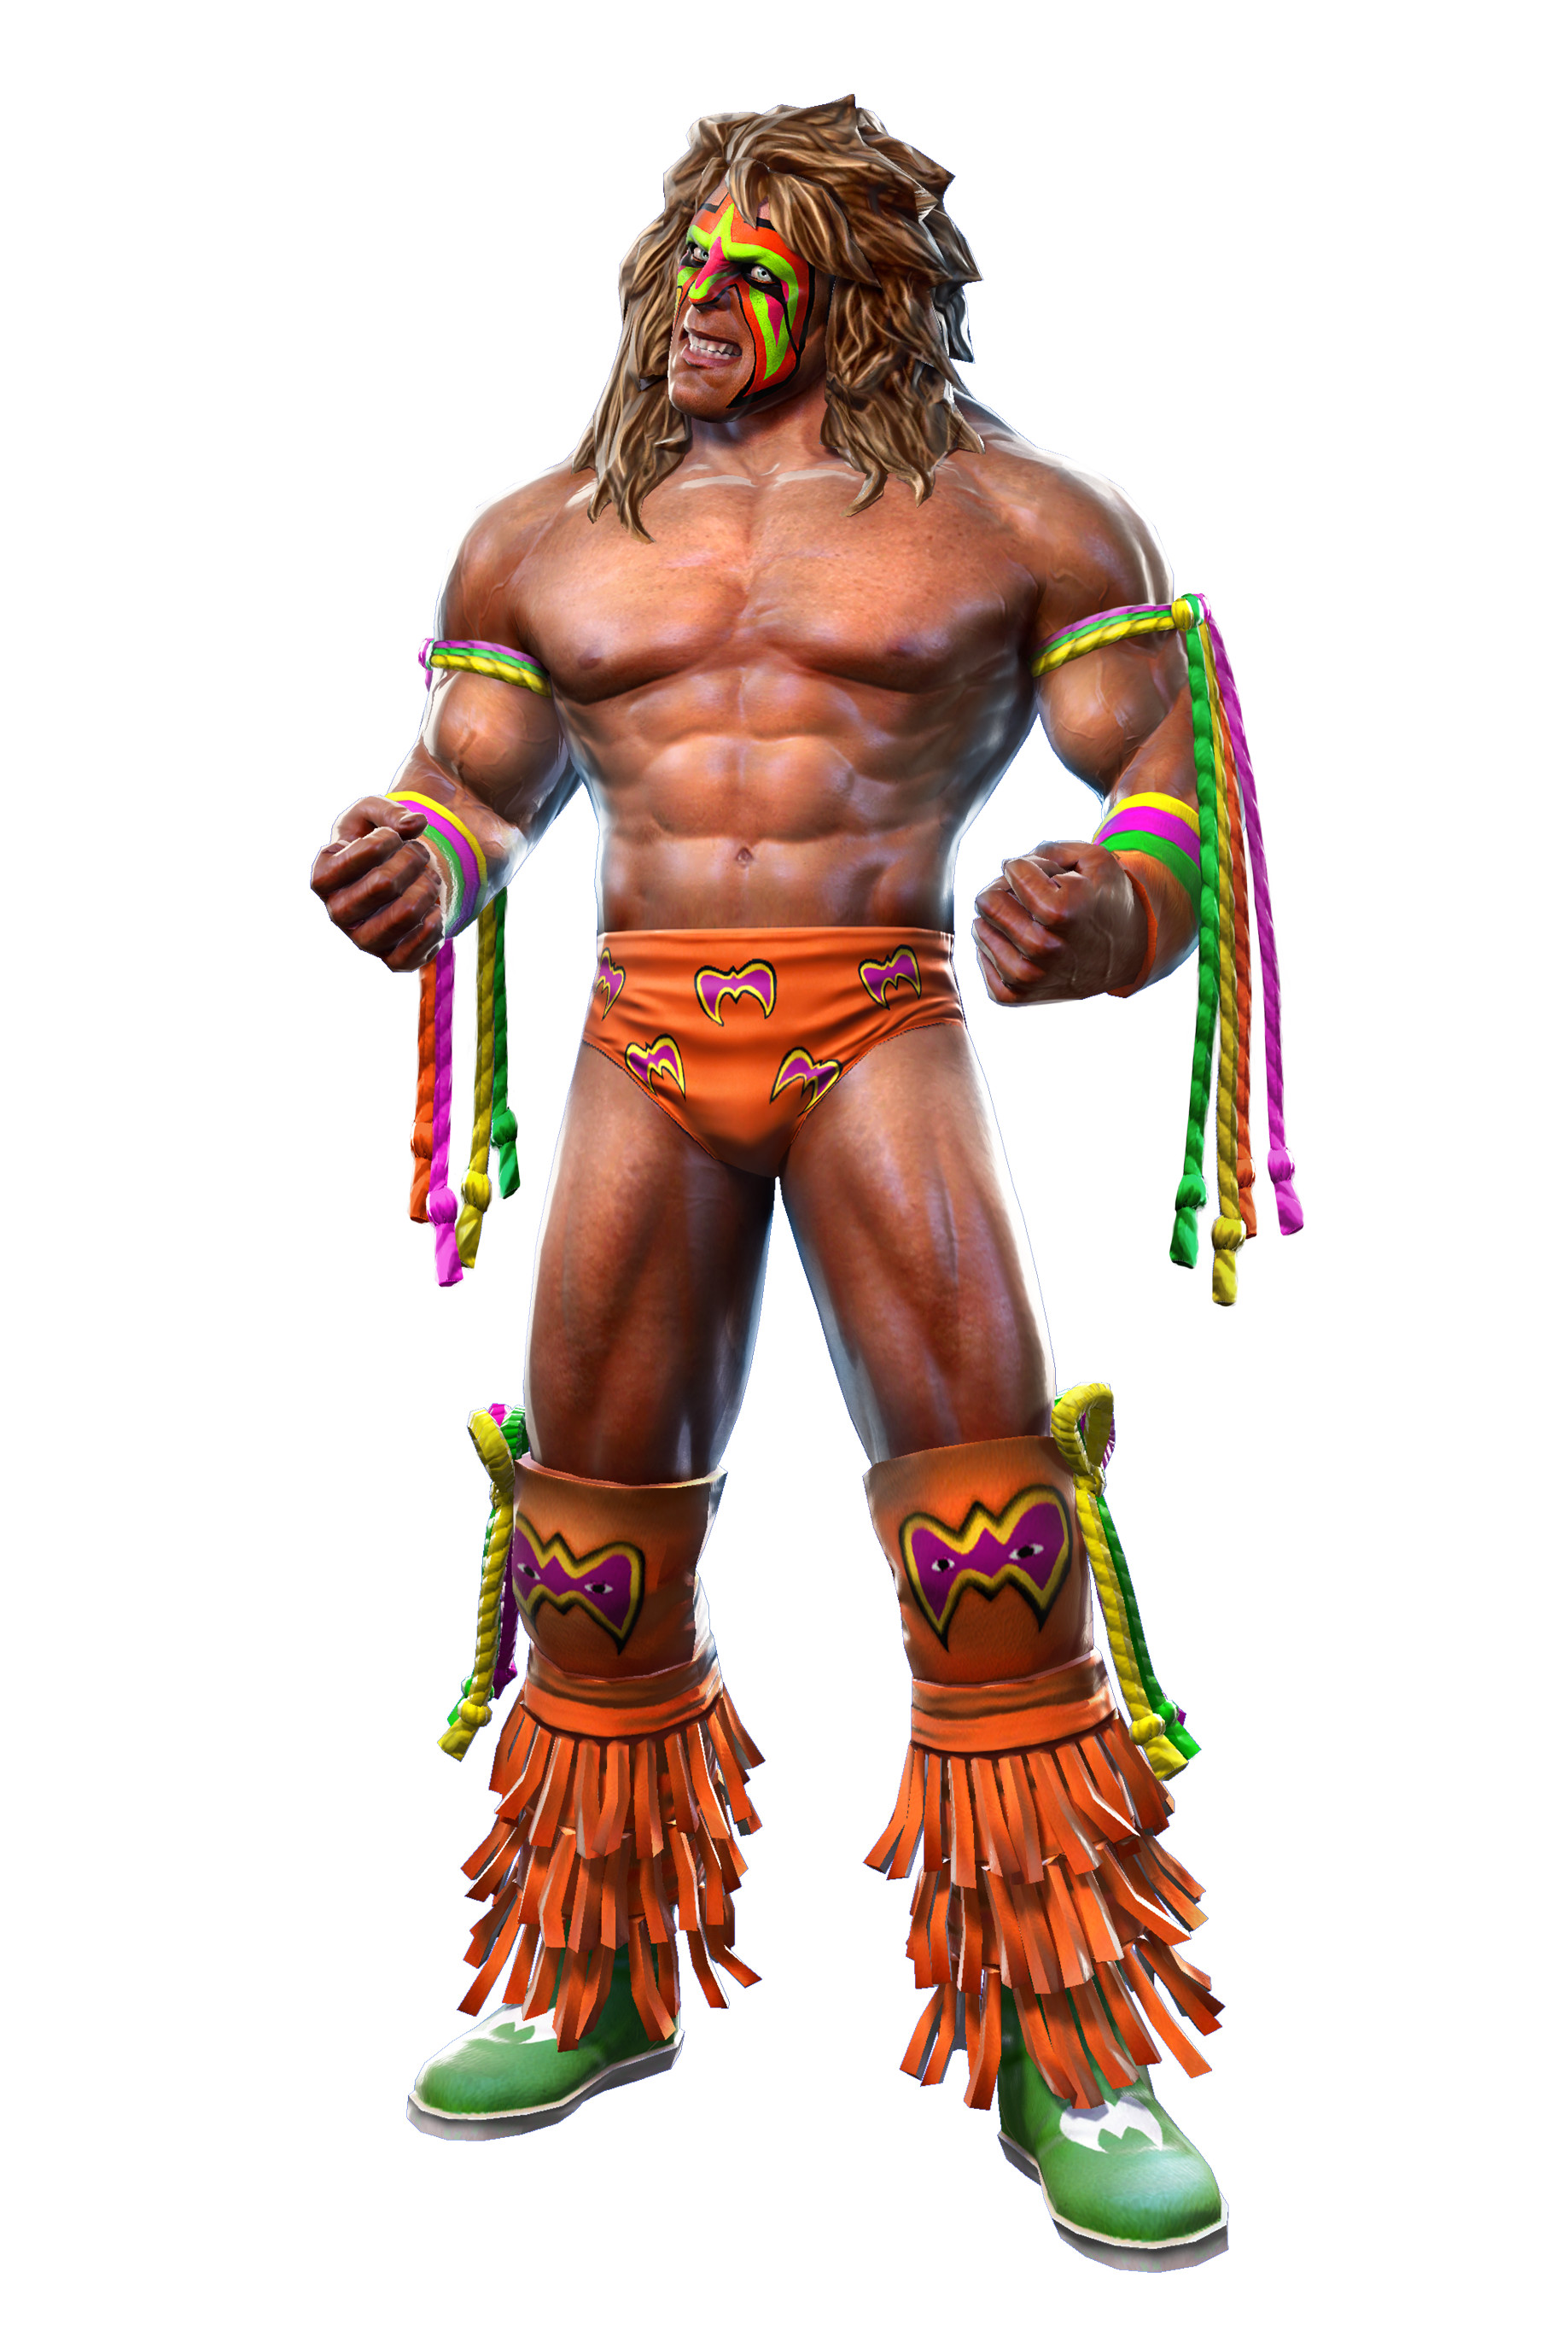 The Ultimate Warrior 1024×768 Widescreen Image | Special  Backgrounds, v.22